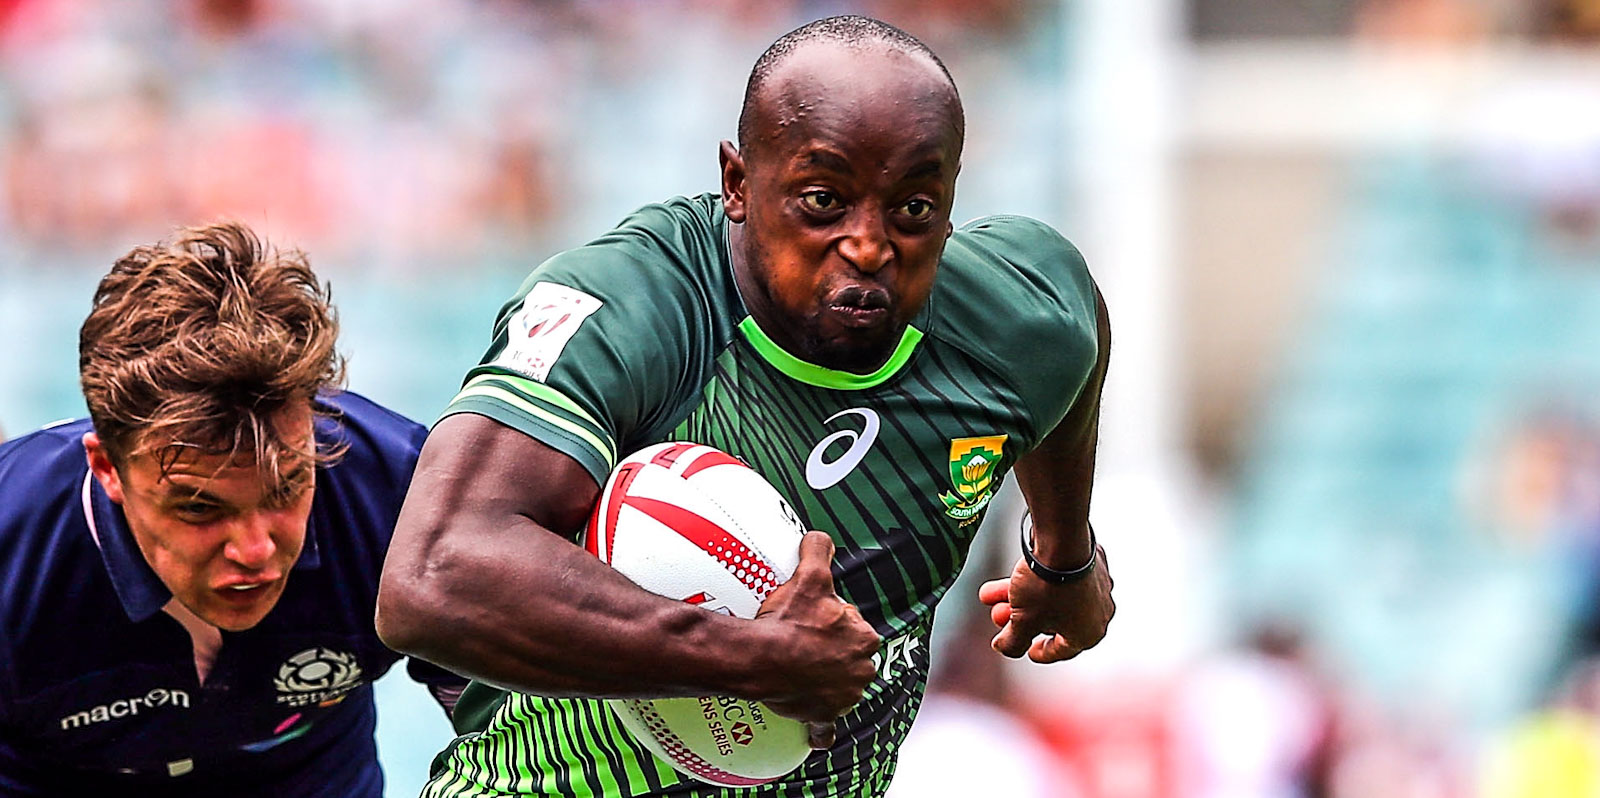 Sandile Ngcobo in action for the Blitzboks a few years ago